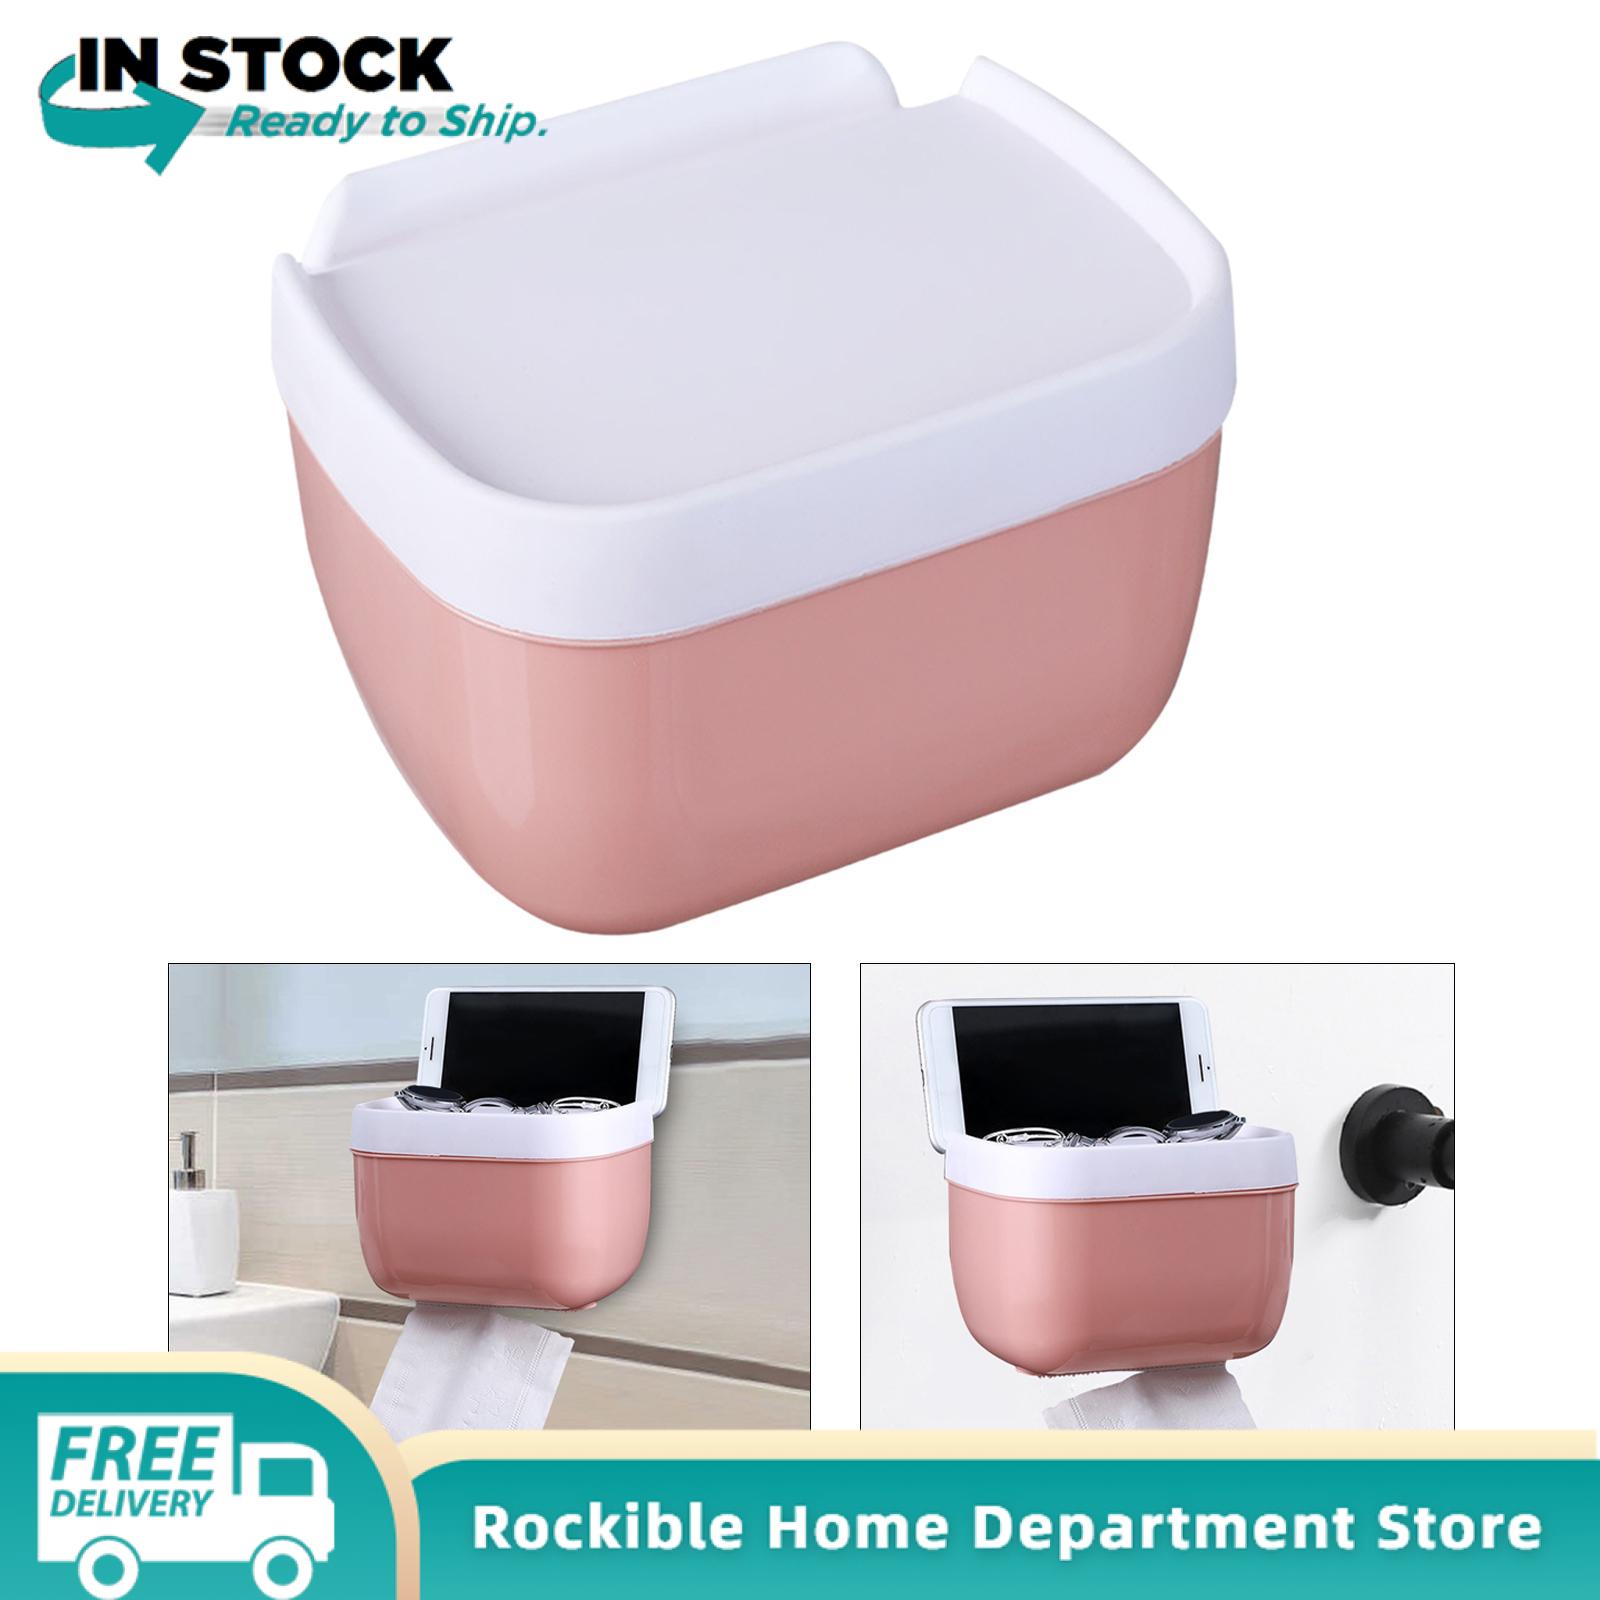 rockible Wall Mounted Toilet Paper Holder with Shelf Waterproof for Toilet